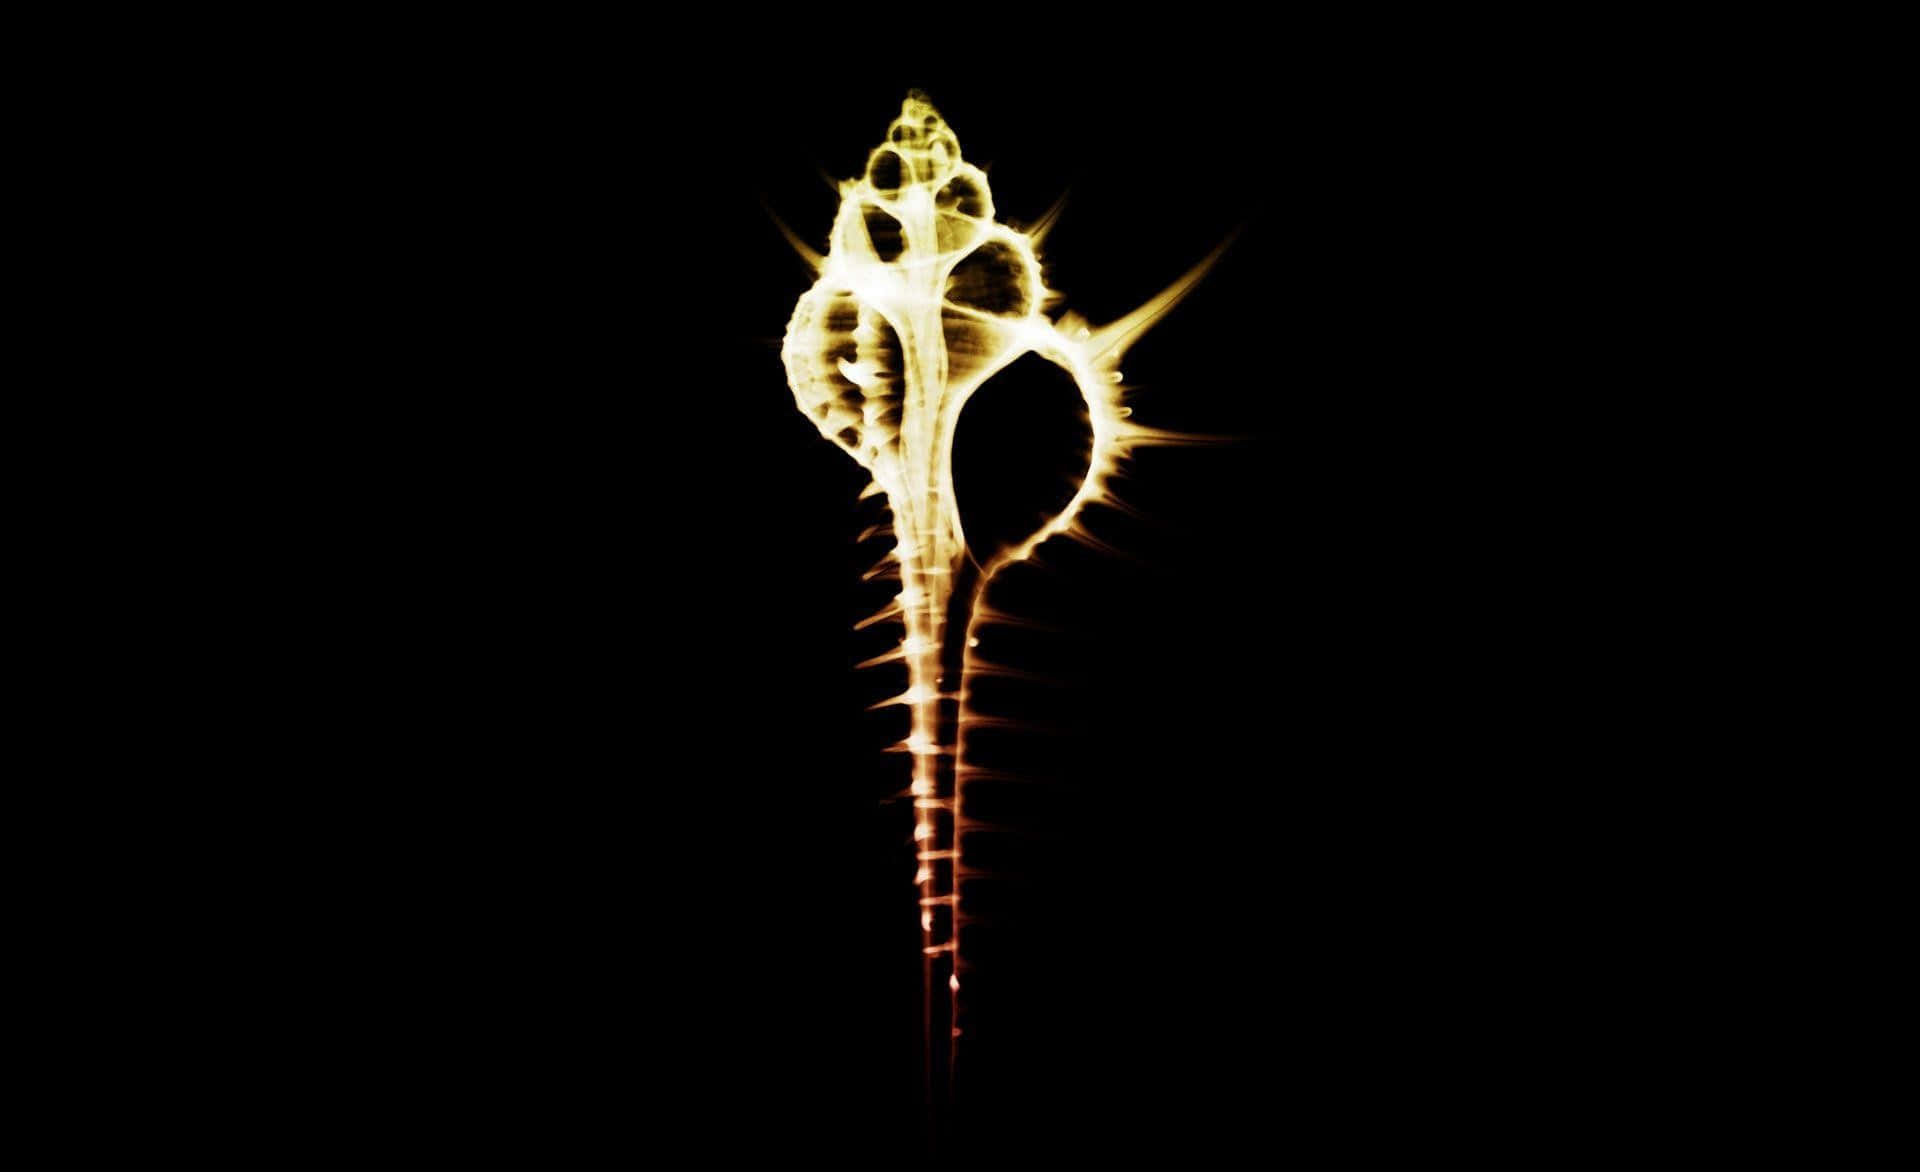 A Golden Sword With A Black Background